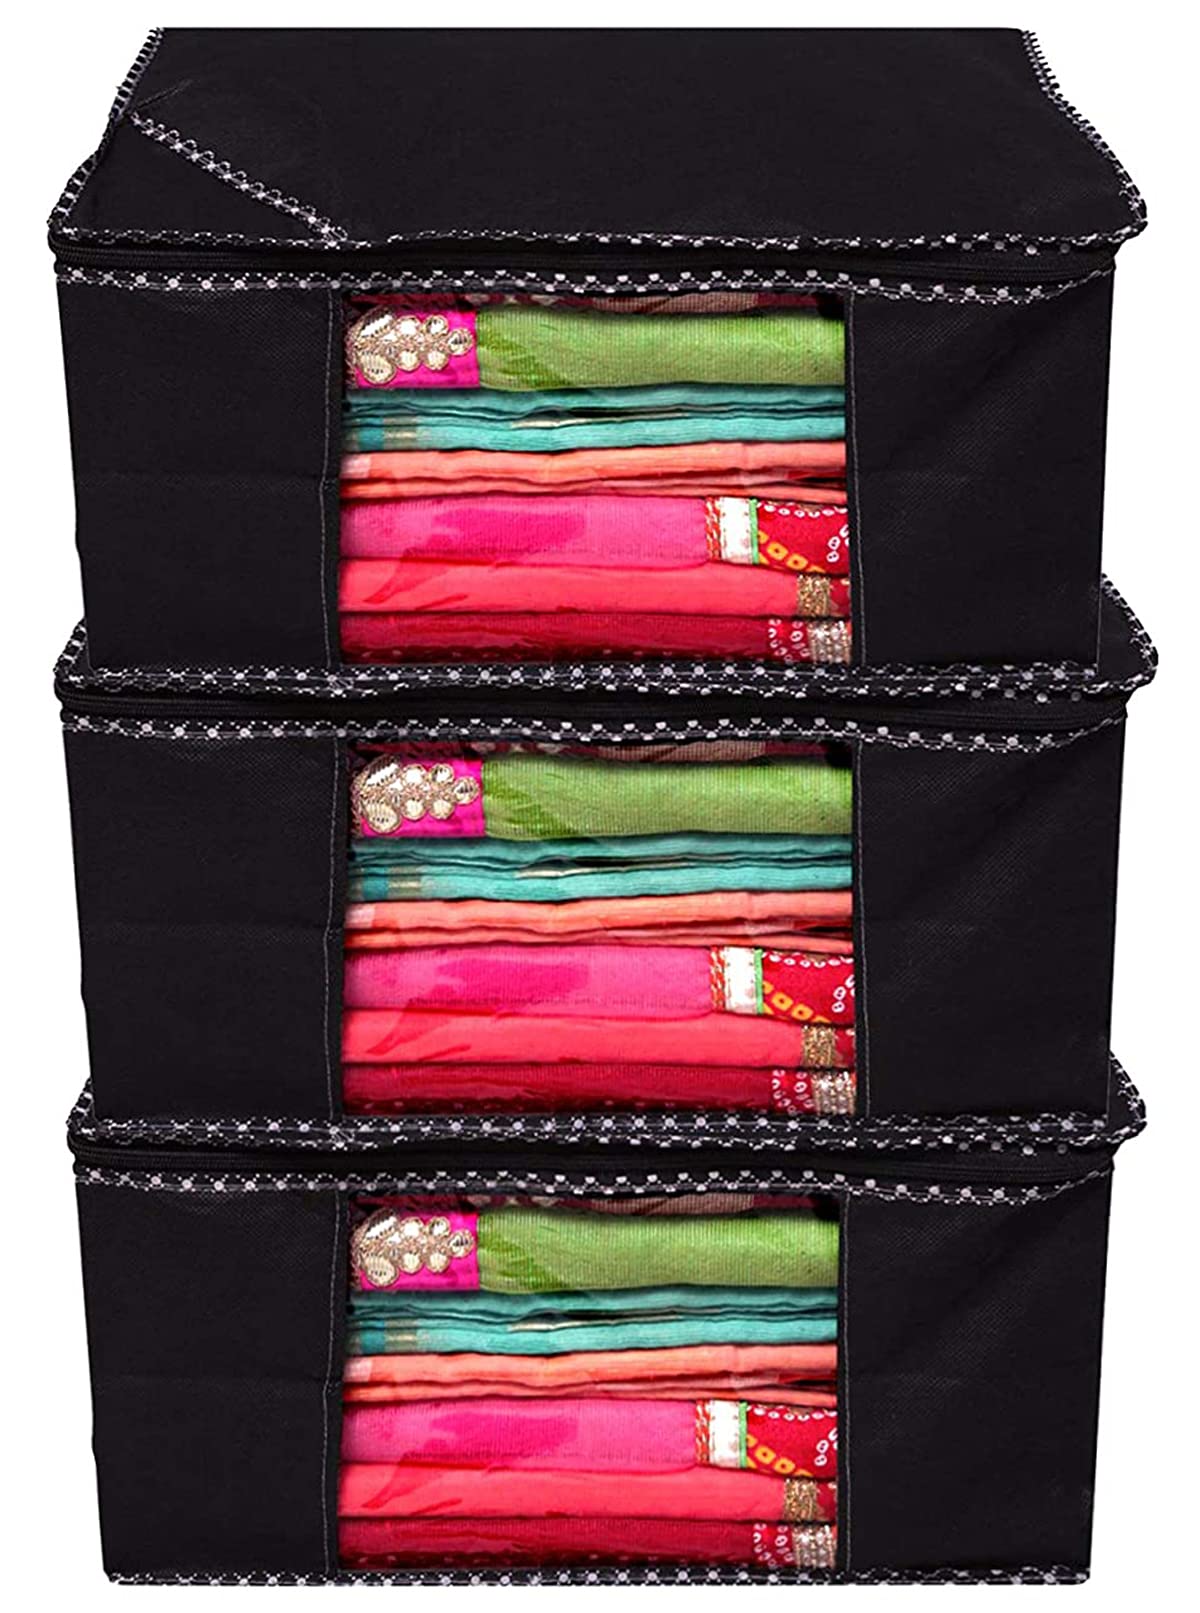 Kuber Industries Non Woven Saree Covers With Zip|Saree Covers For Storage|Saree Packing Covers For Wedding|Pack of 3 (Black)